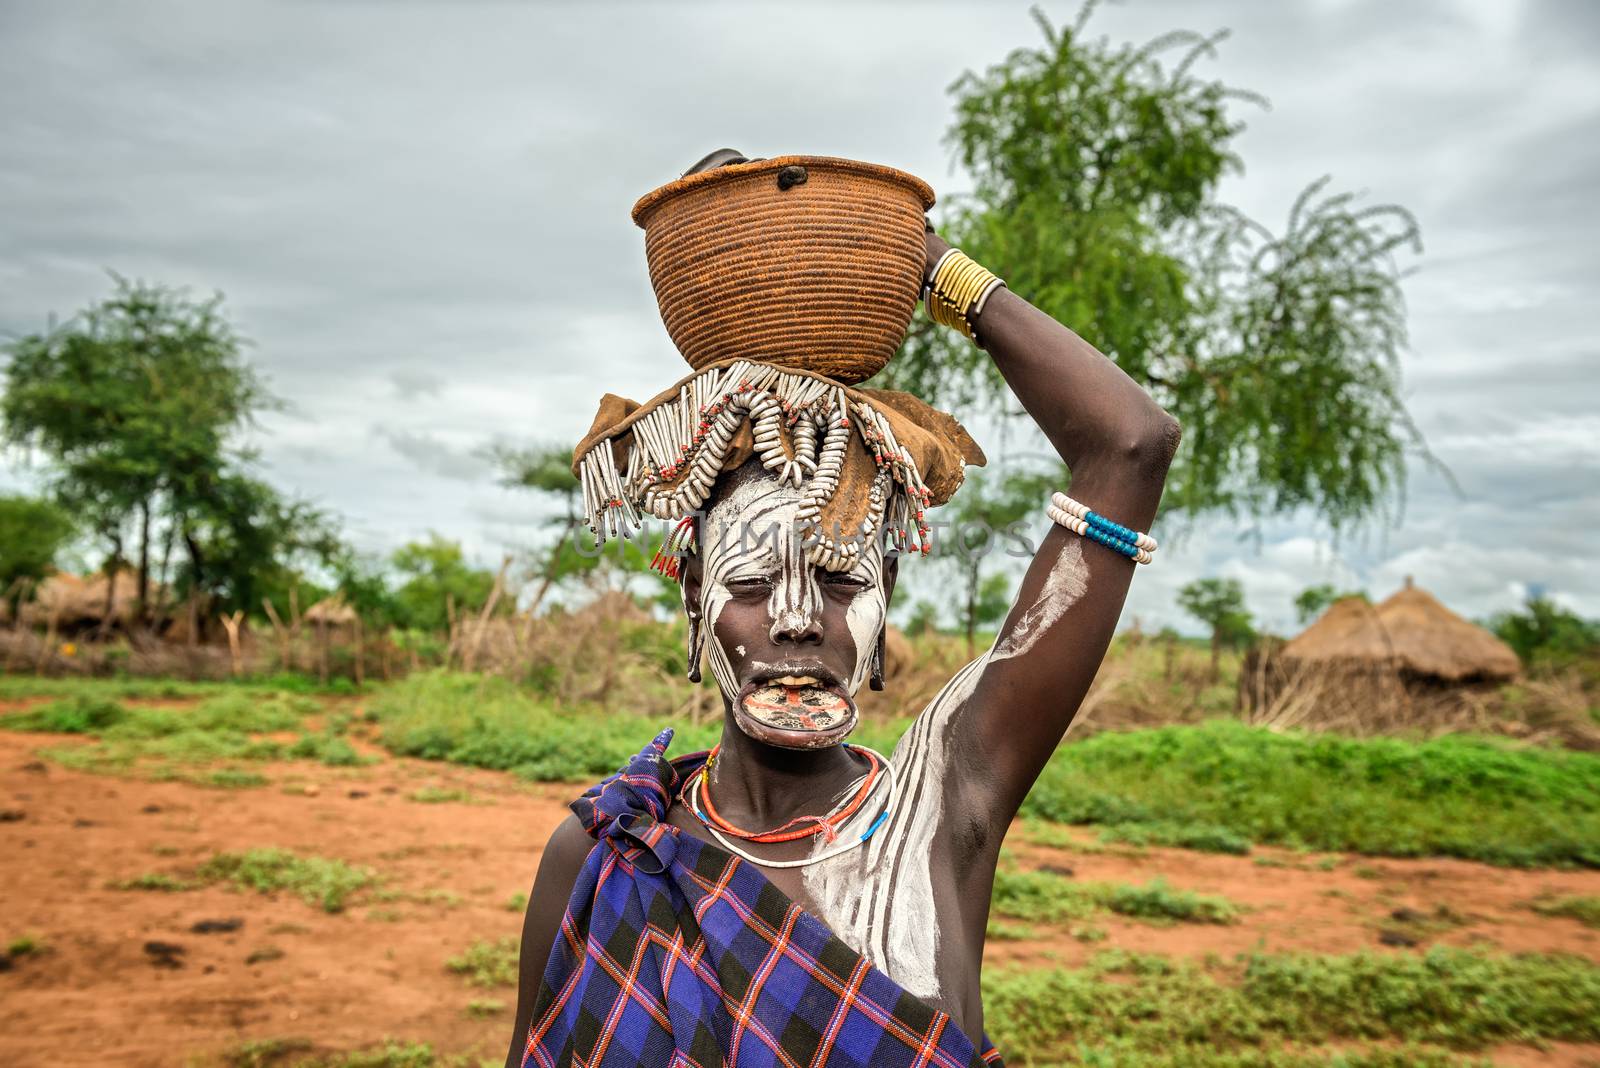 Woman from the african tribe Mursi, Omo Valley, Ethiopia by nickfox